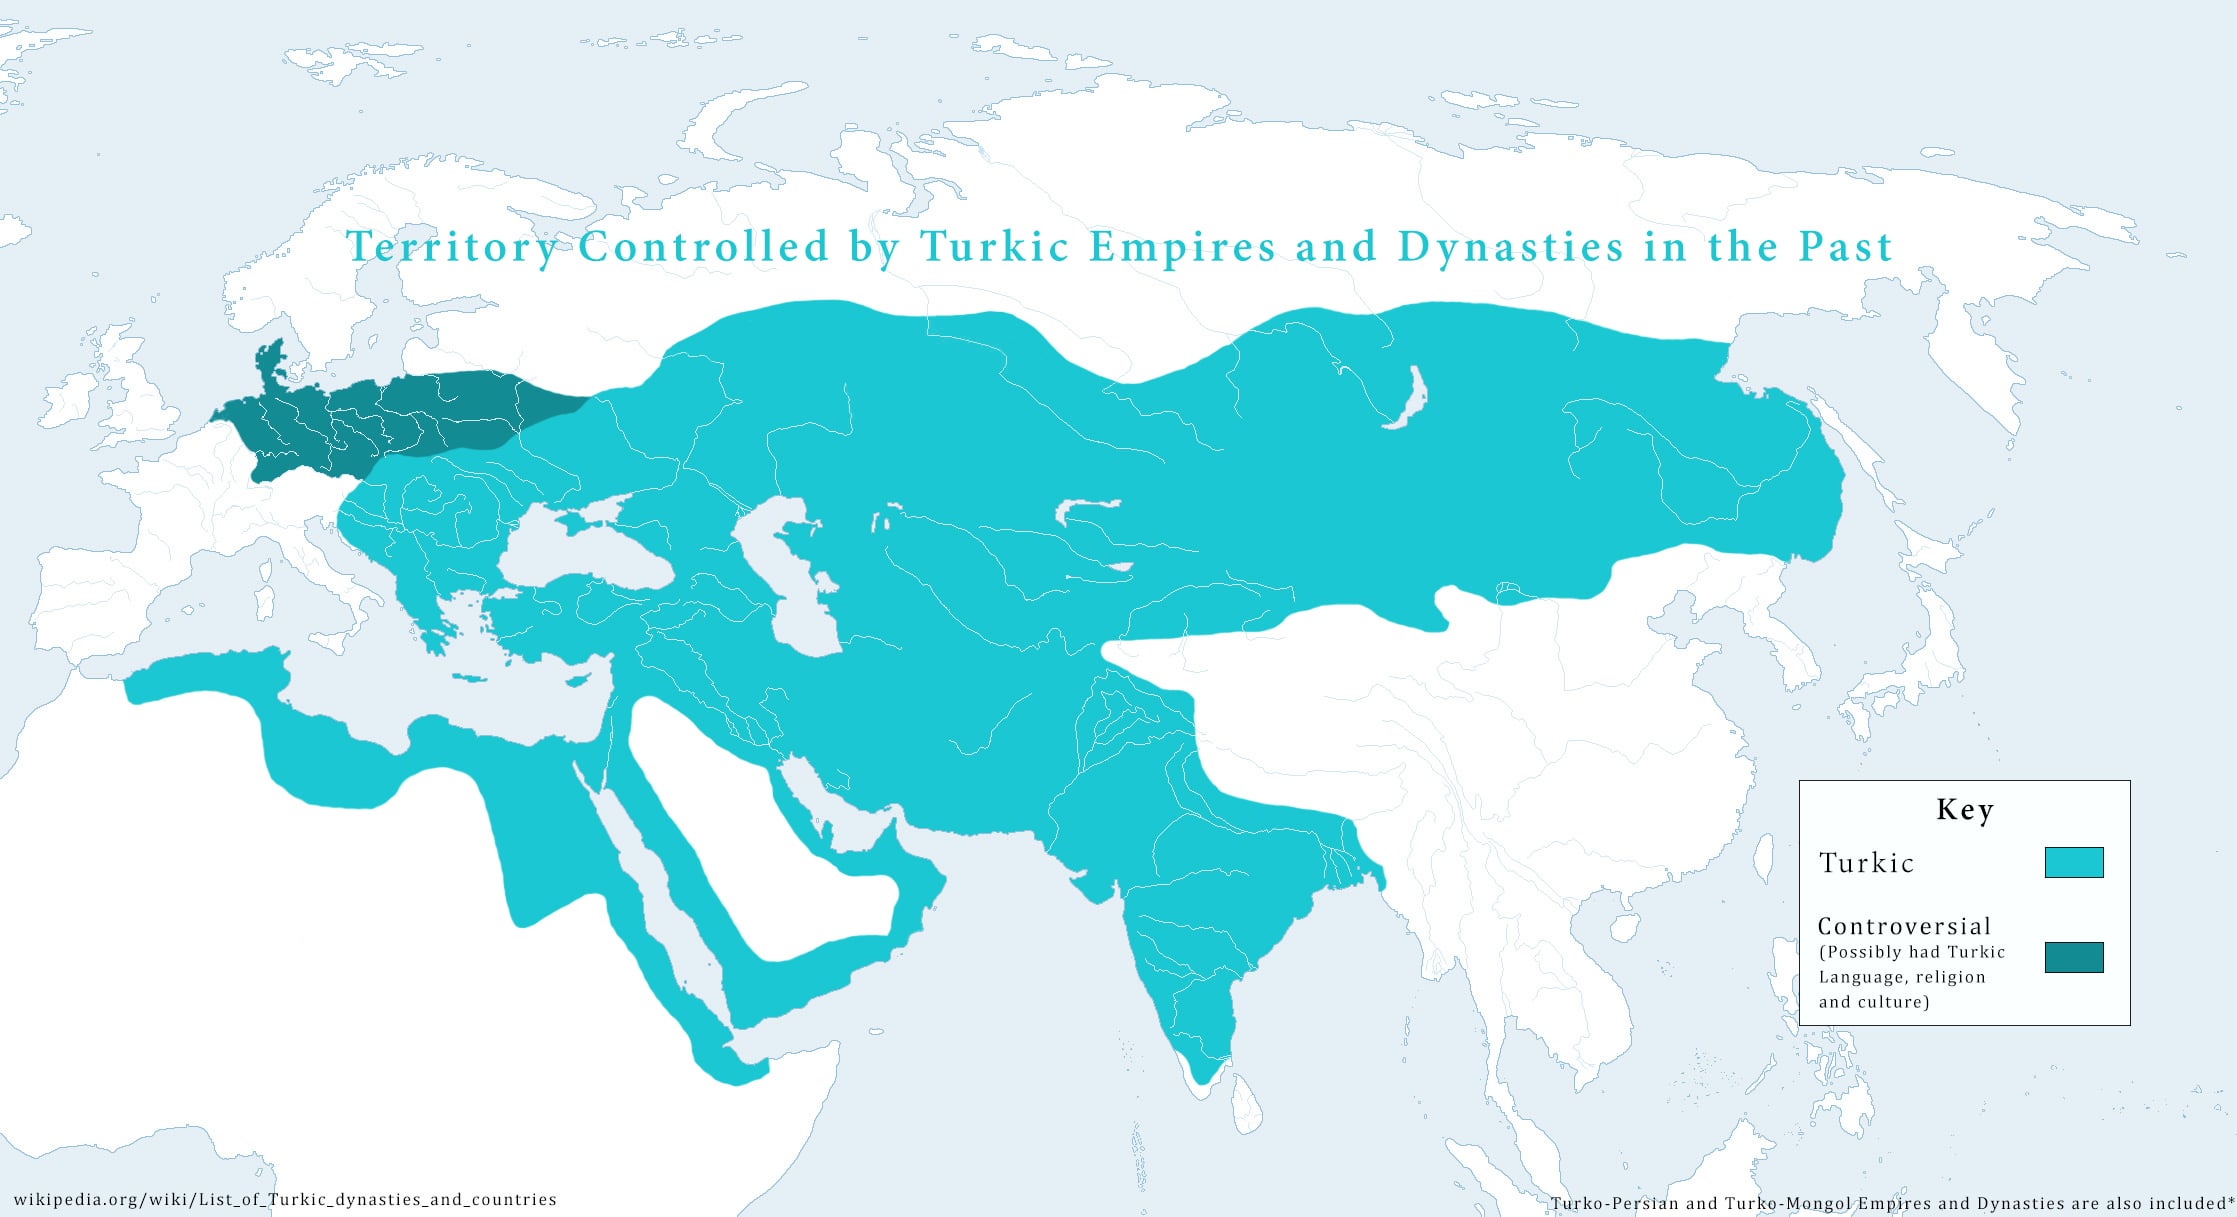 territory-controlled-by-turkic-empires-and-dynasties-in-the-v0-3wafjcwubjr81.jpg